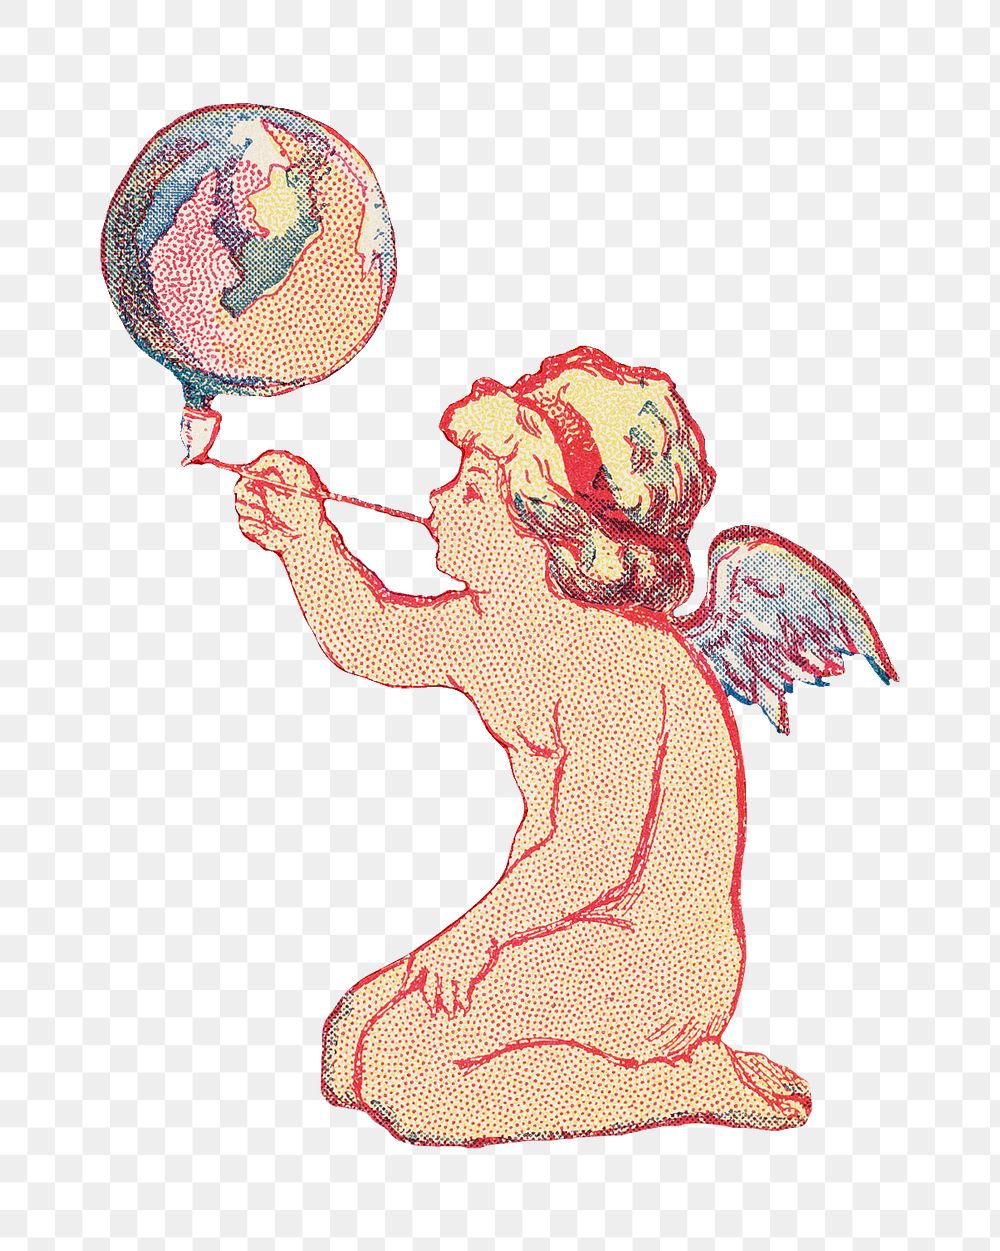 PNG Cupid blowing bubble, vintage illustration by Wells, Richardson & Co, transparent background.  Remixed by rawpixel. 